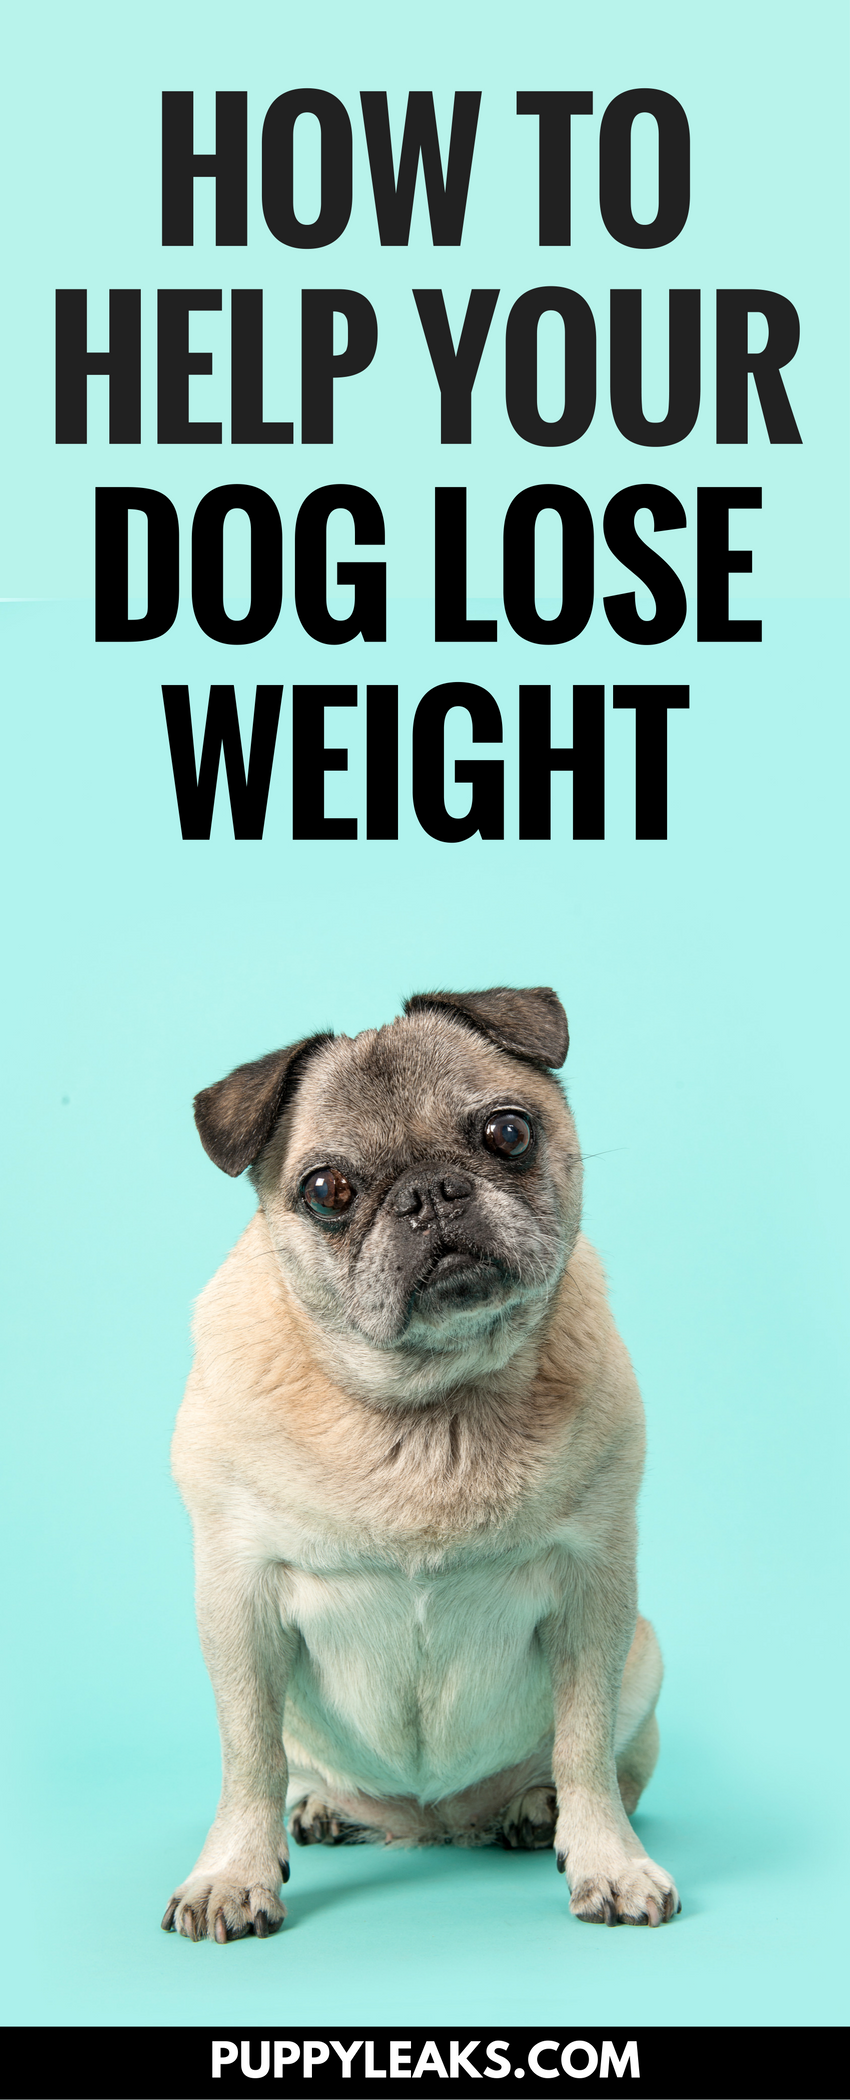 5 Tips To Help Your Dog Lose Weight Puppy Leaks